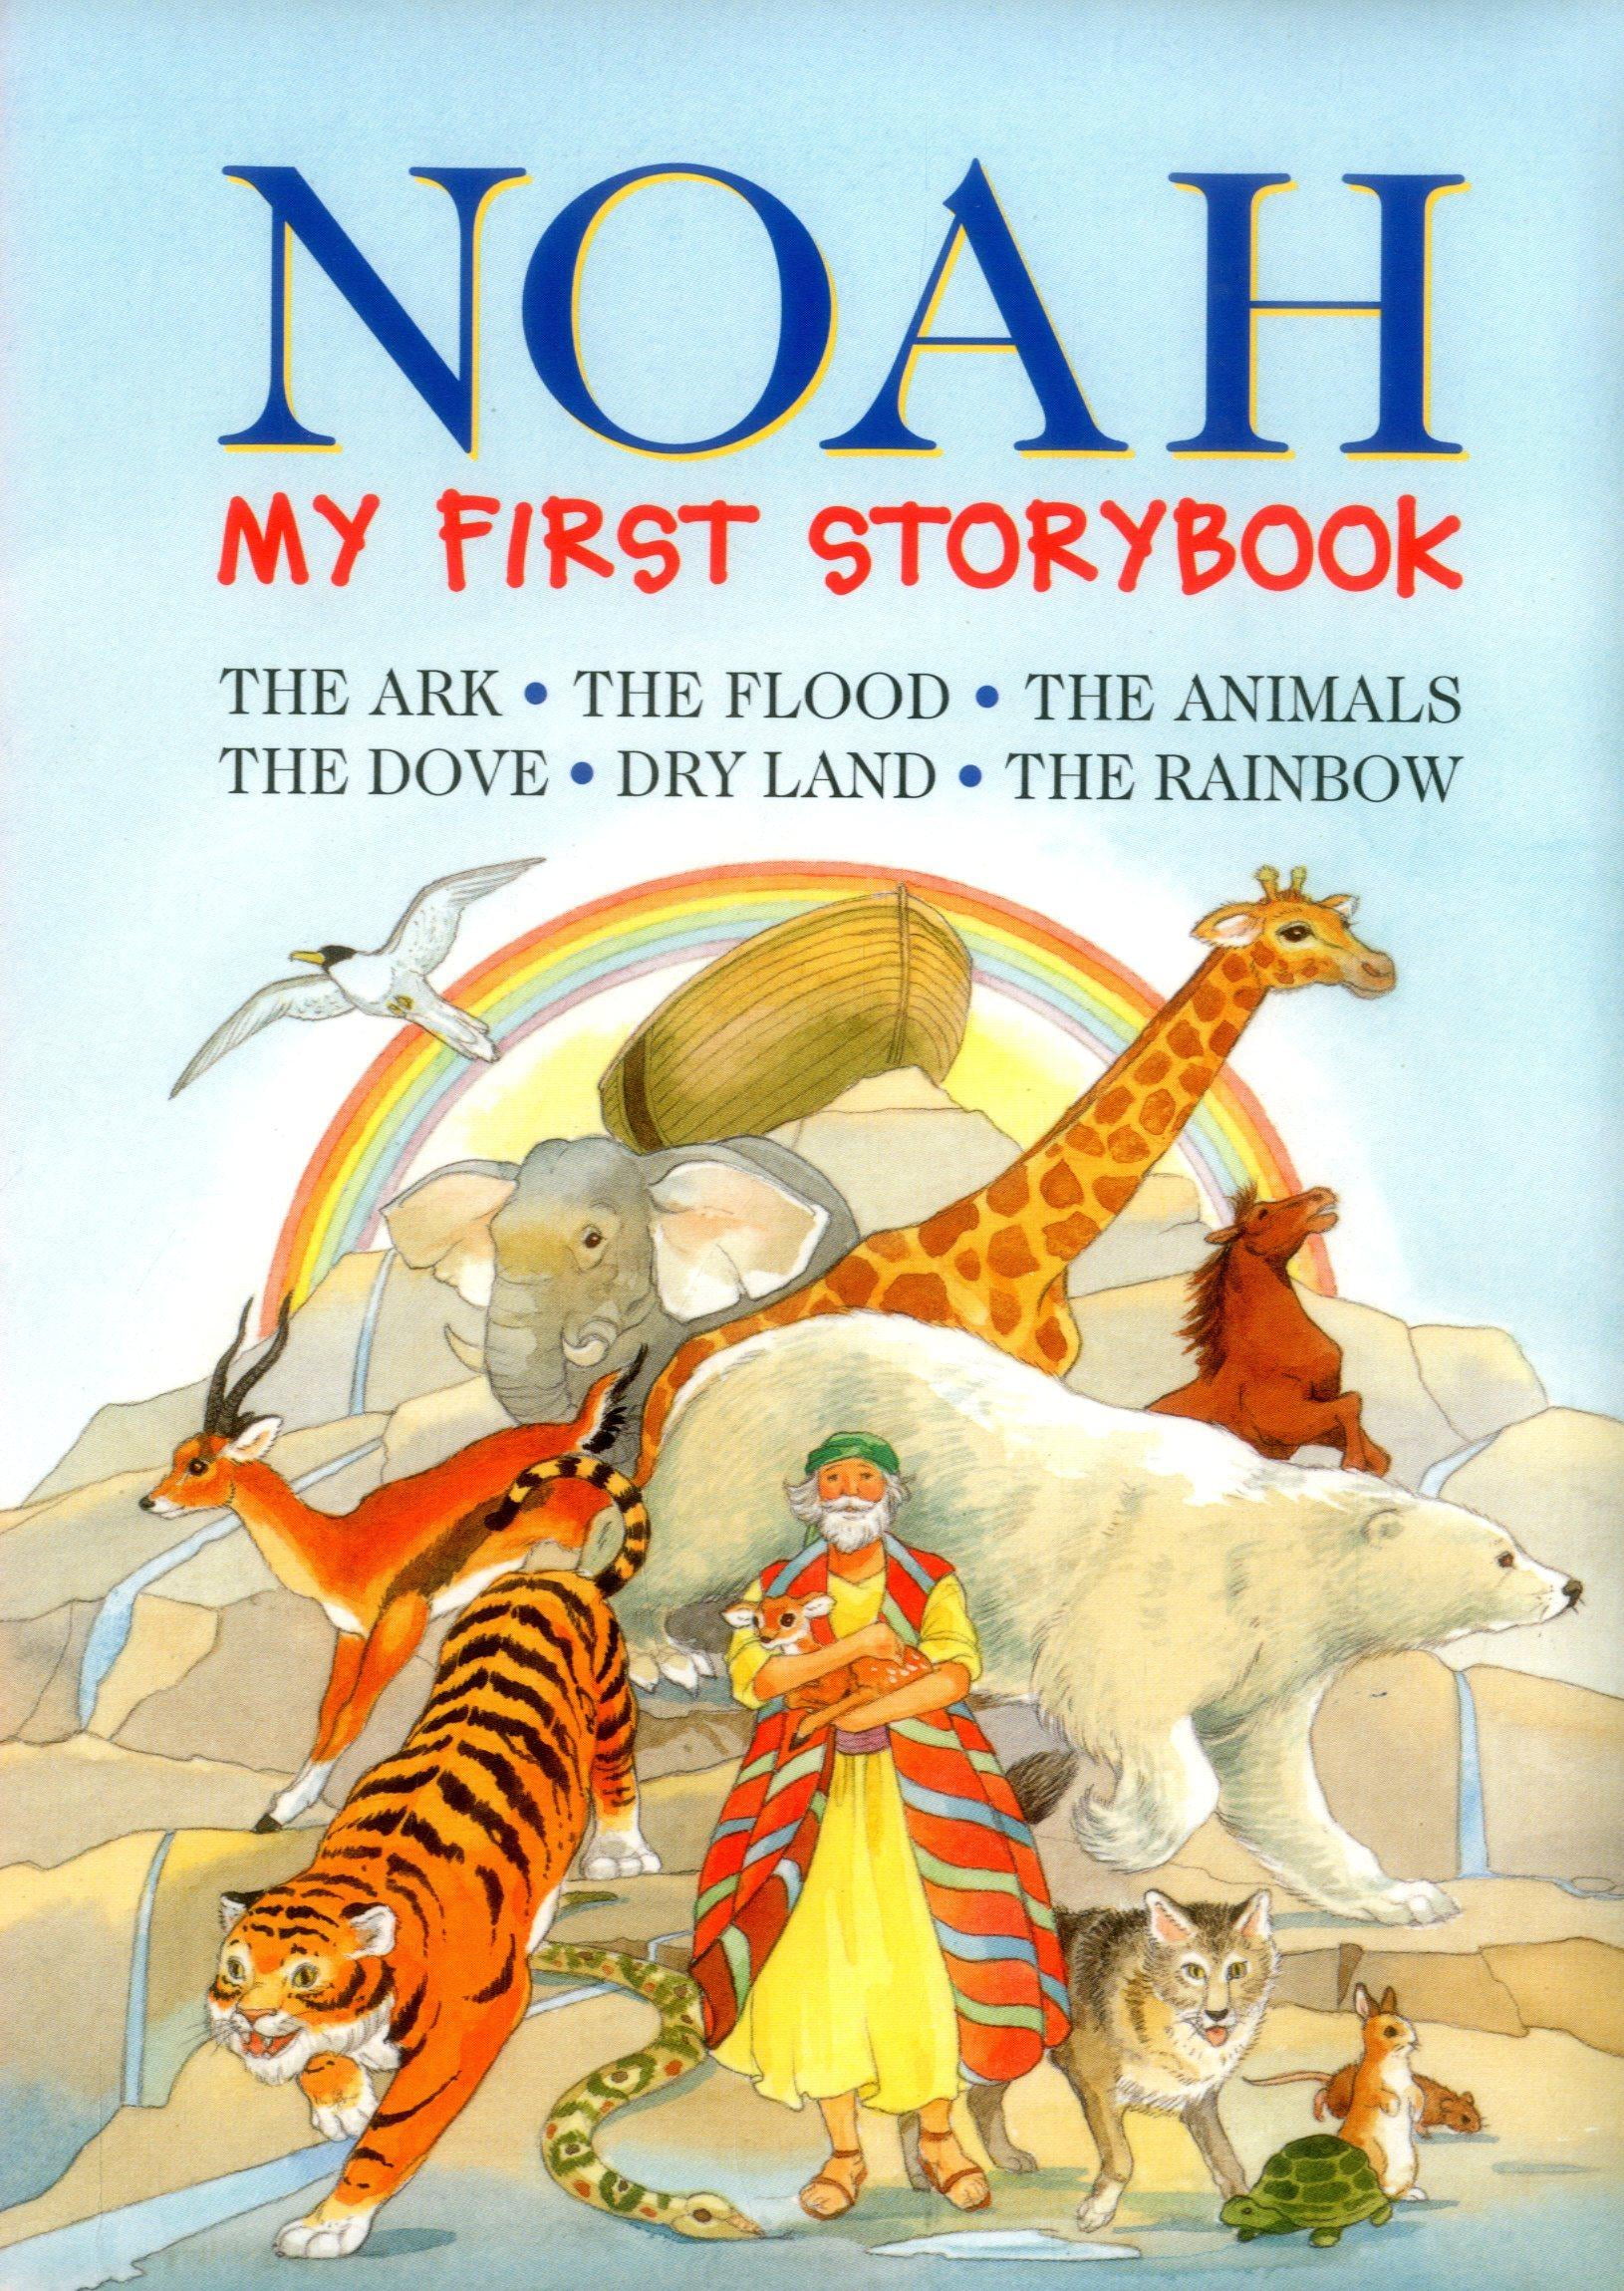 My story book. The Land of story-books.